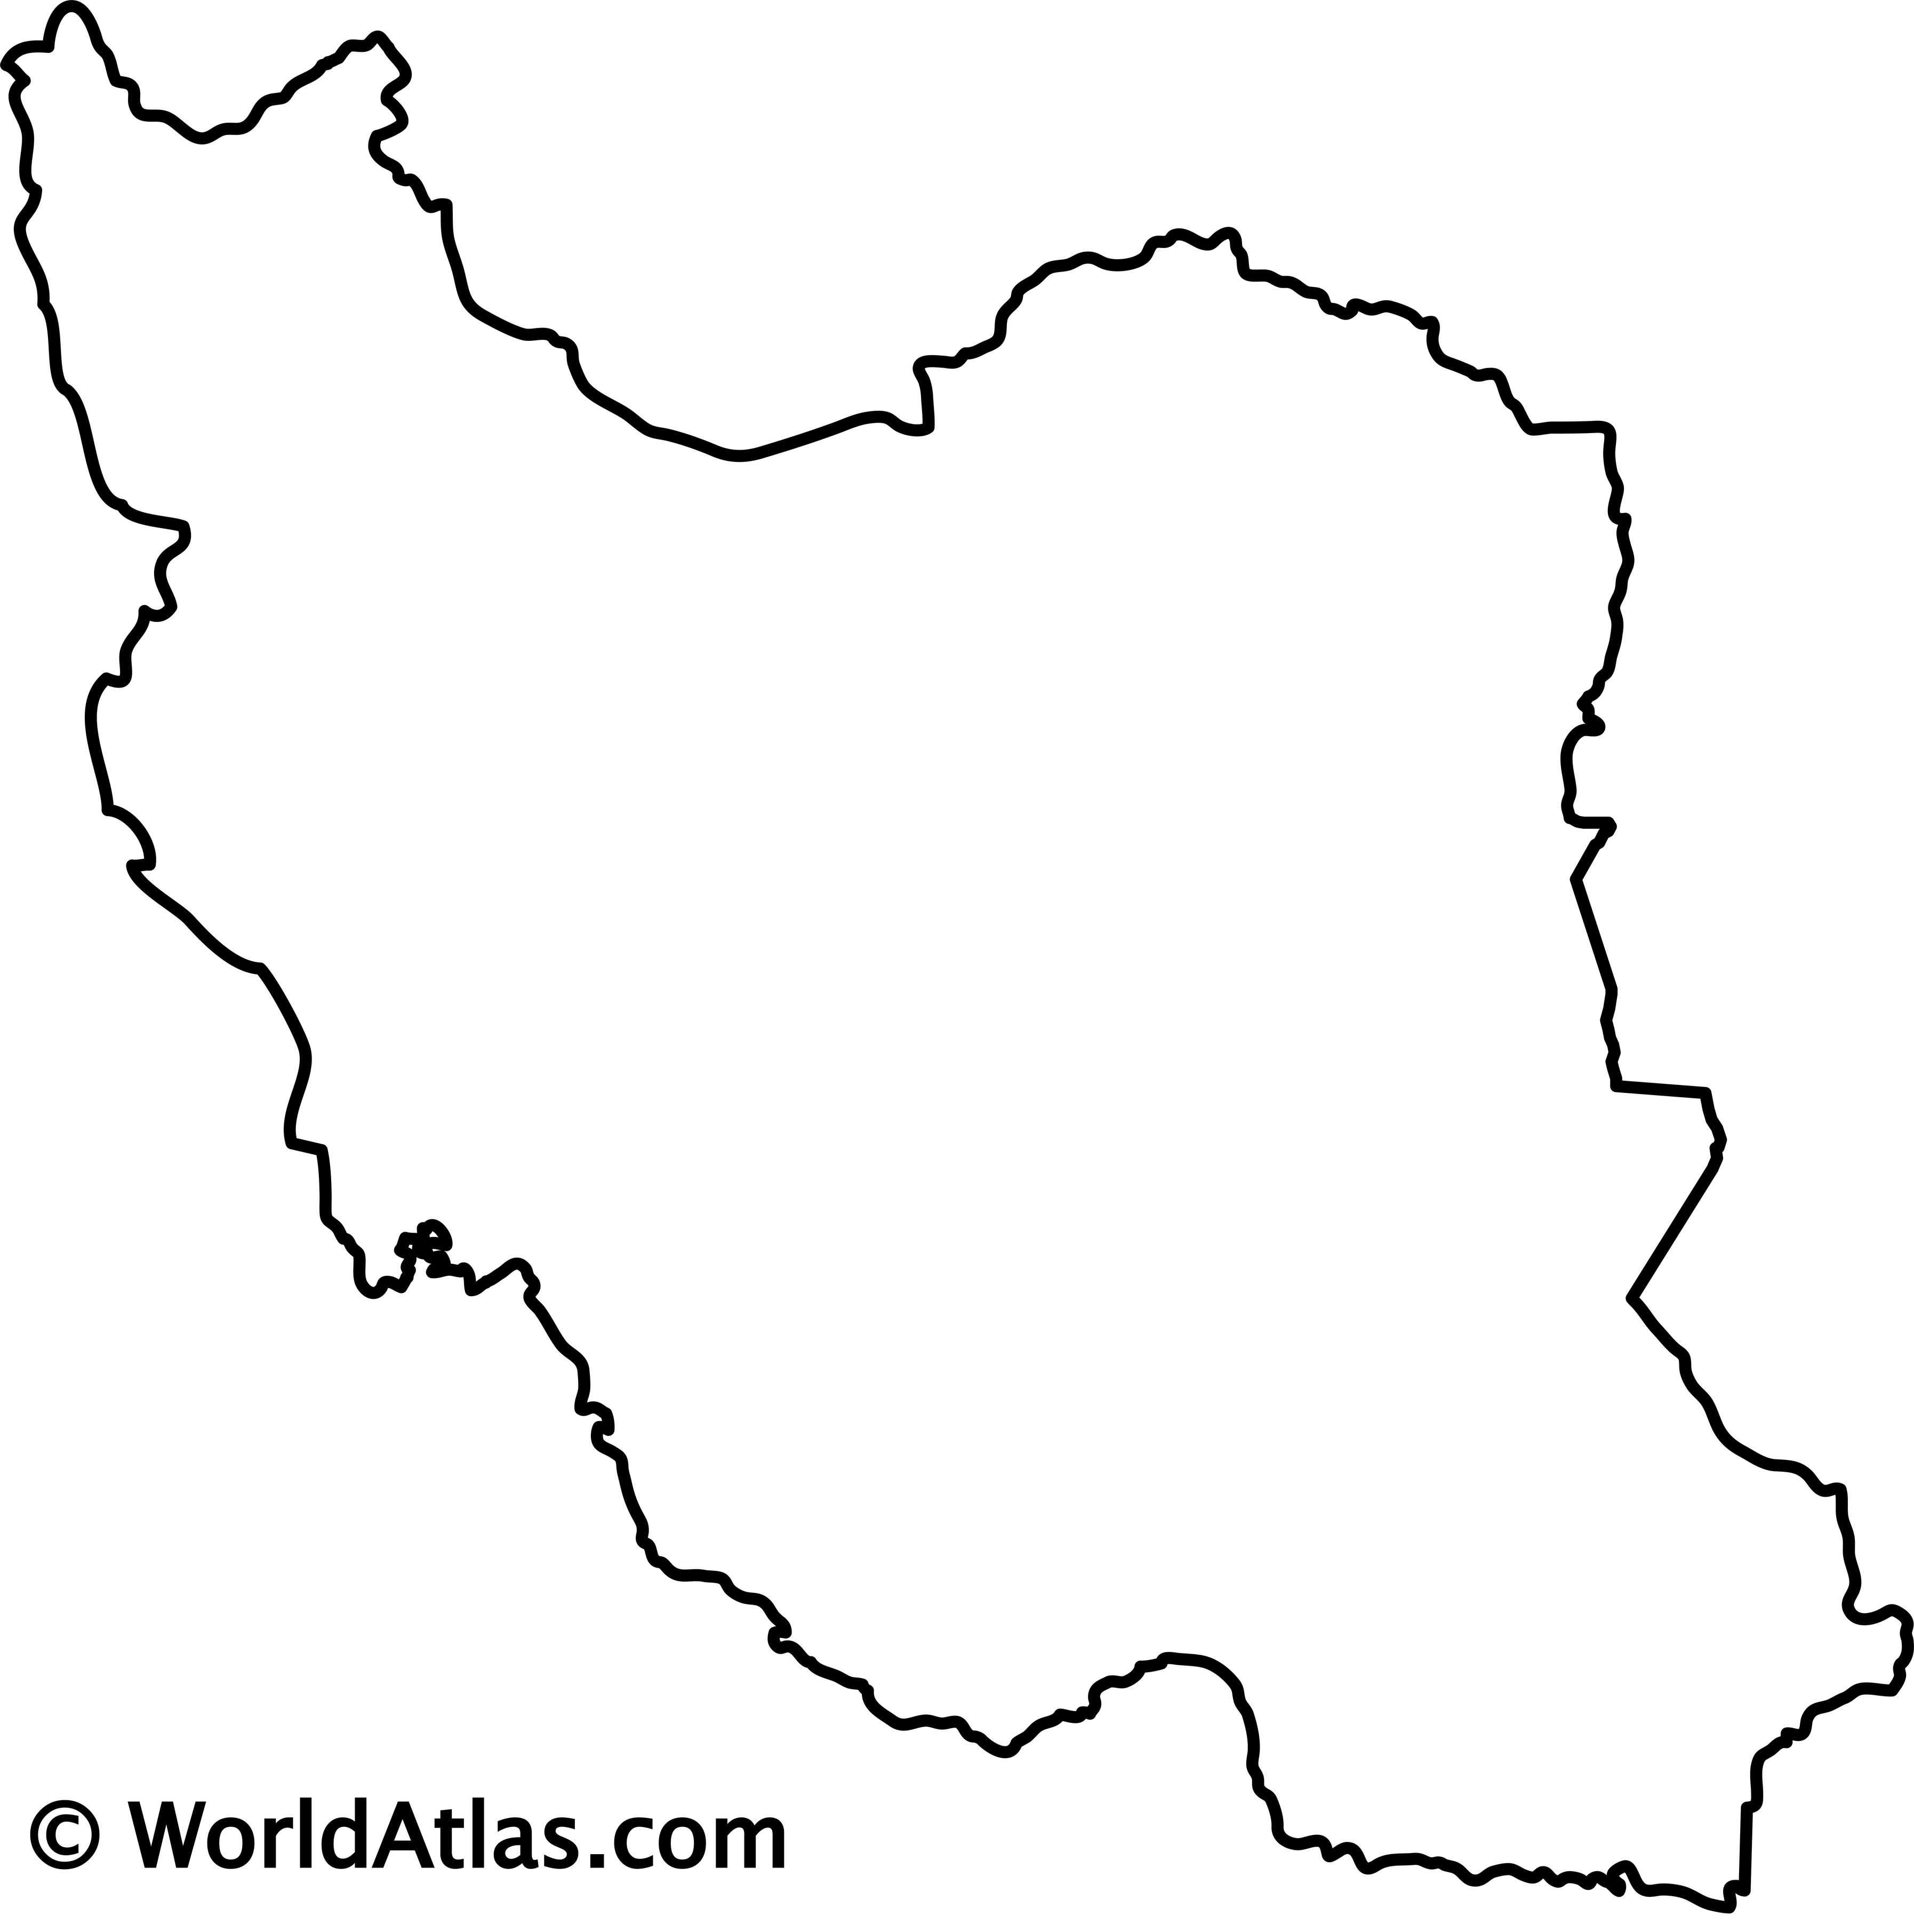 Guess The Country By The Shape (Hard) - TriviaCreator